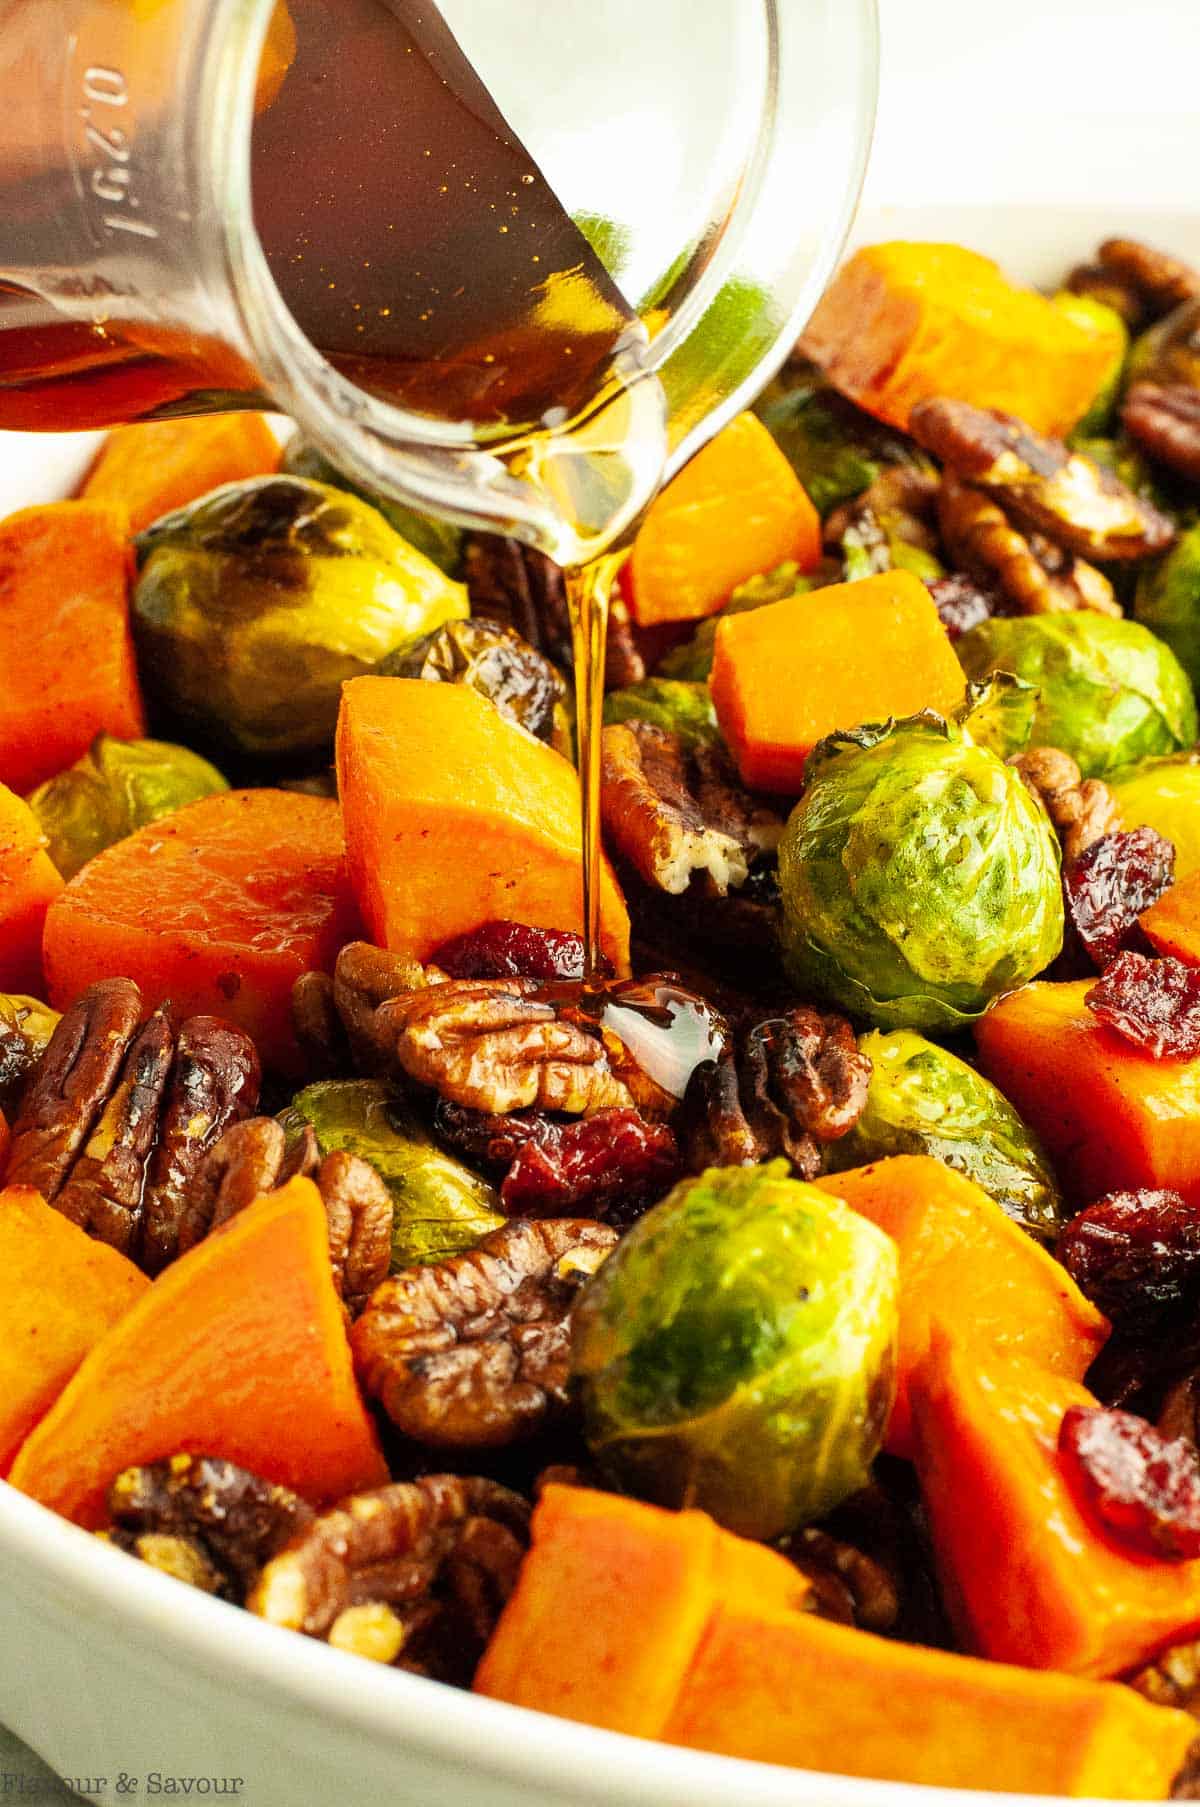 Drizzling maple syrup on roasted sprouts and sweet potatoes.